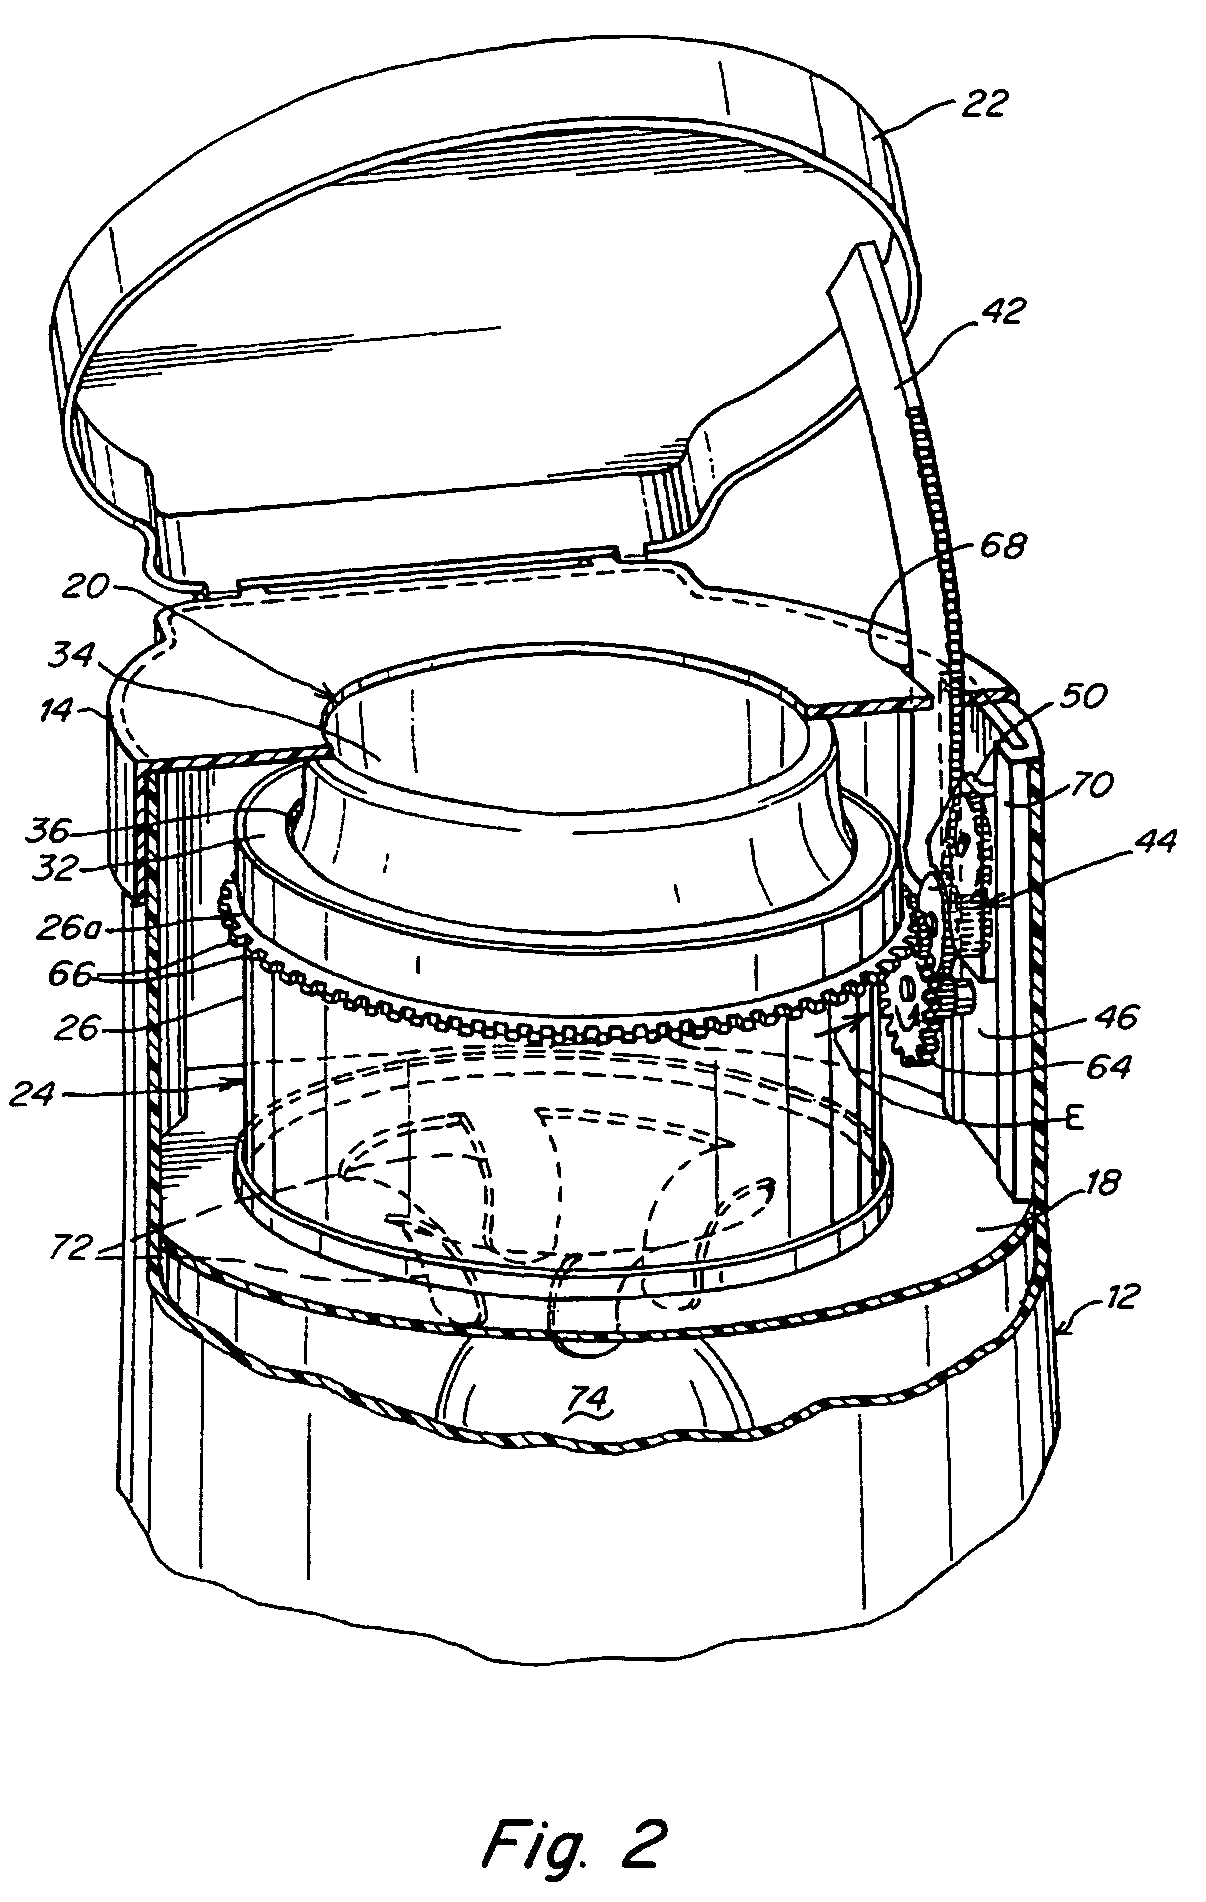 Waste disposal device including a film cutting and sealing device